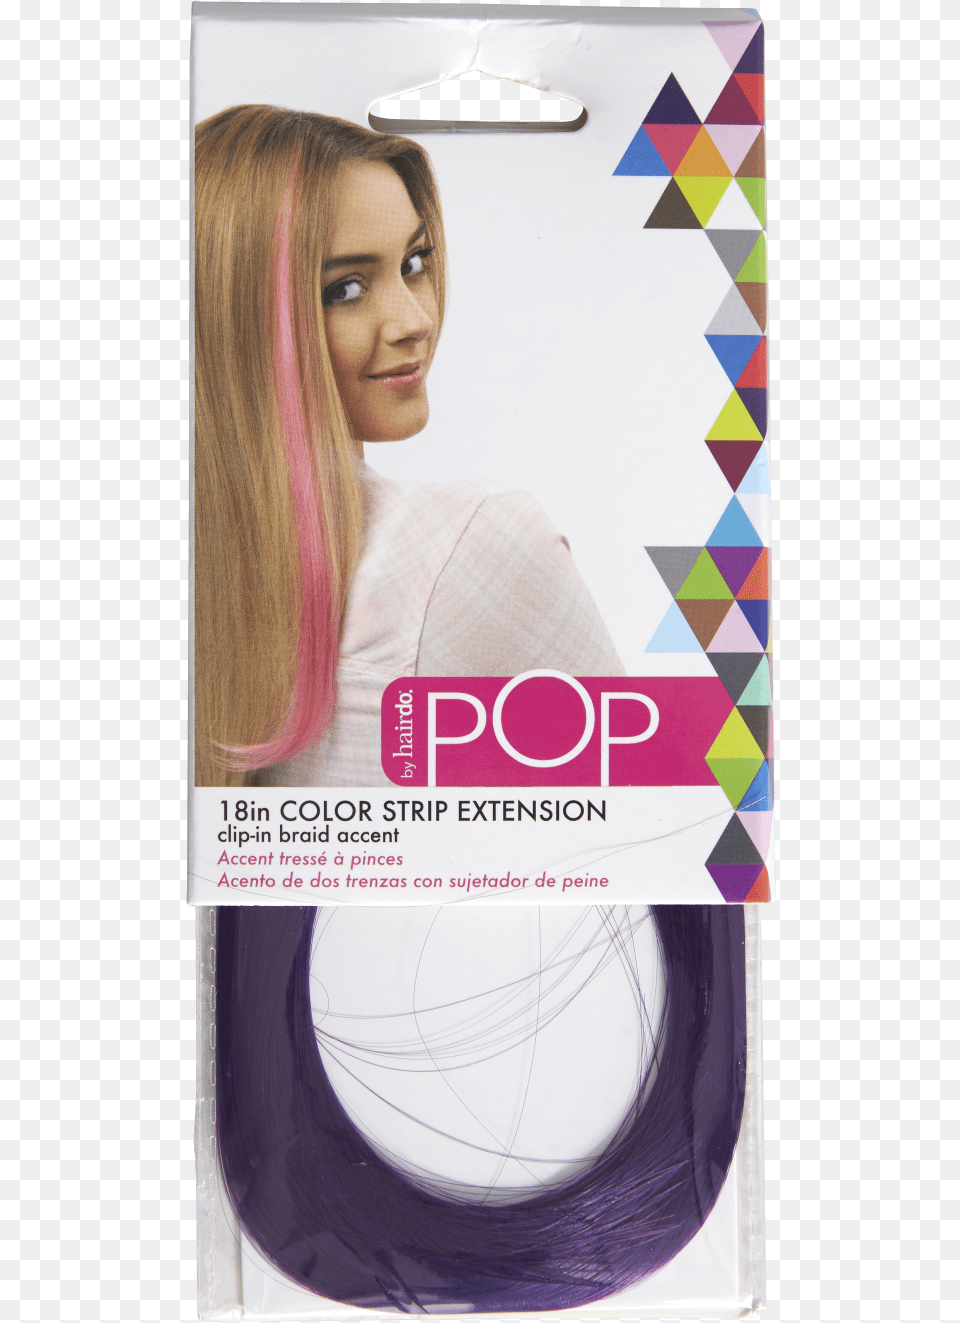 Pop By Hairdo Color Strip Extension, Advertisement, Poster, Adult, Female Png